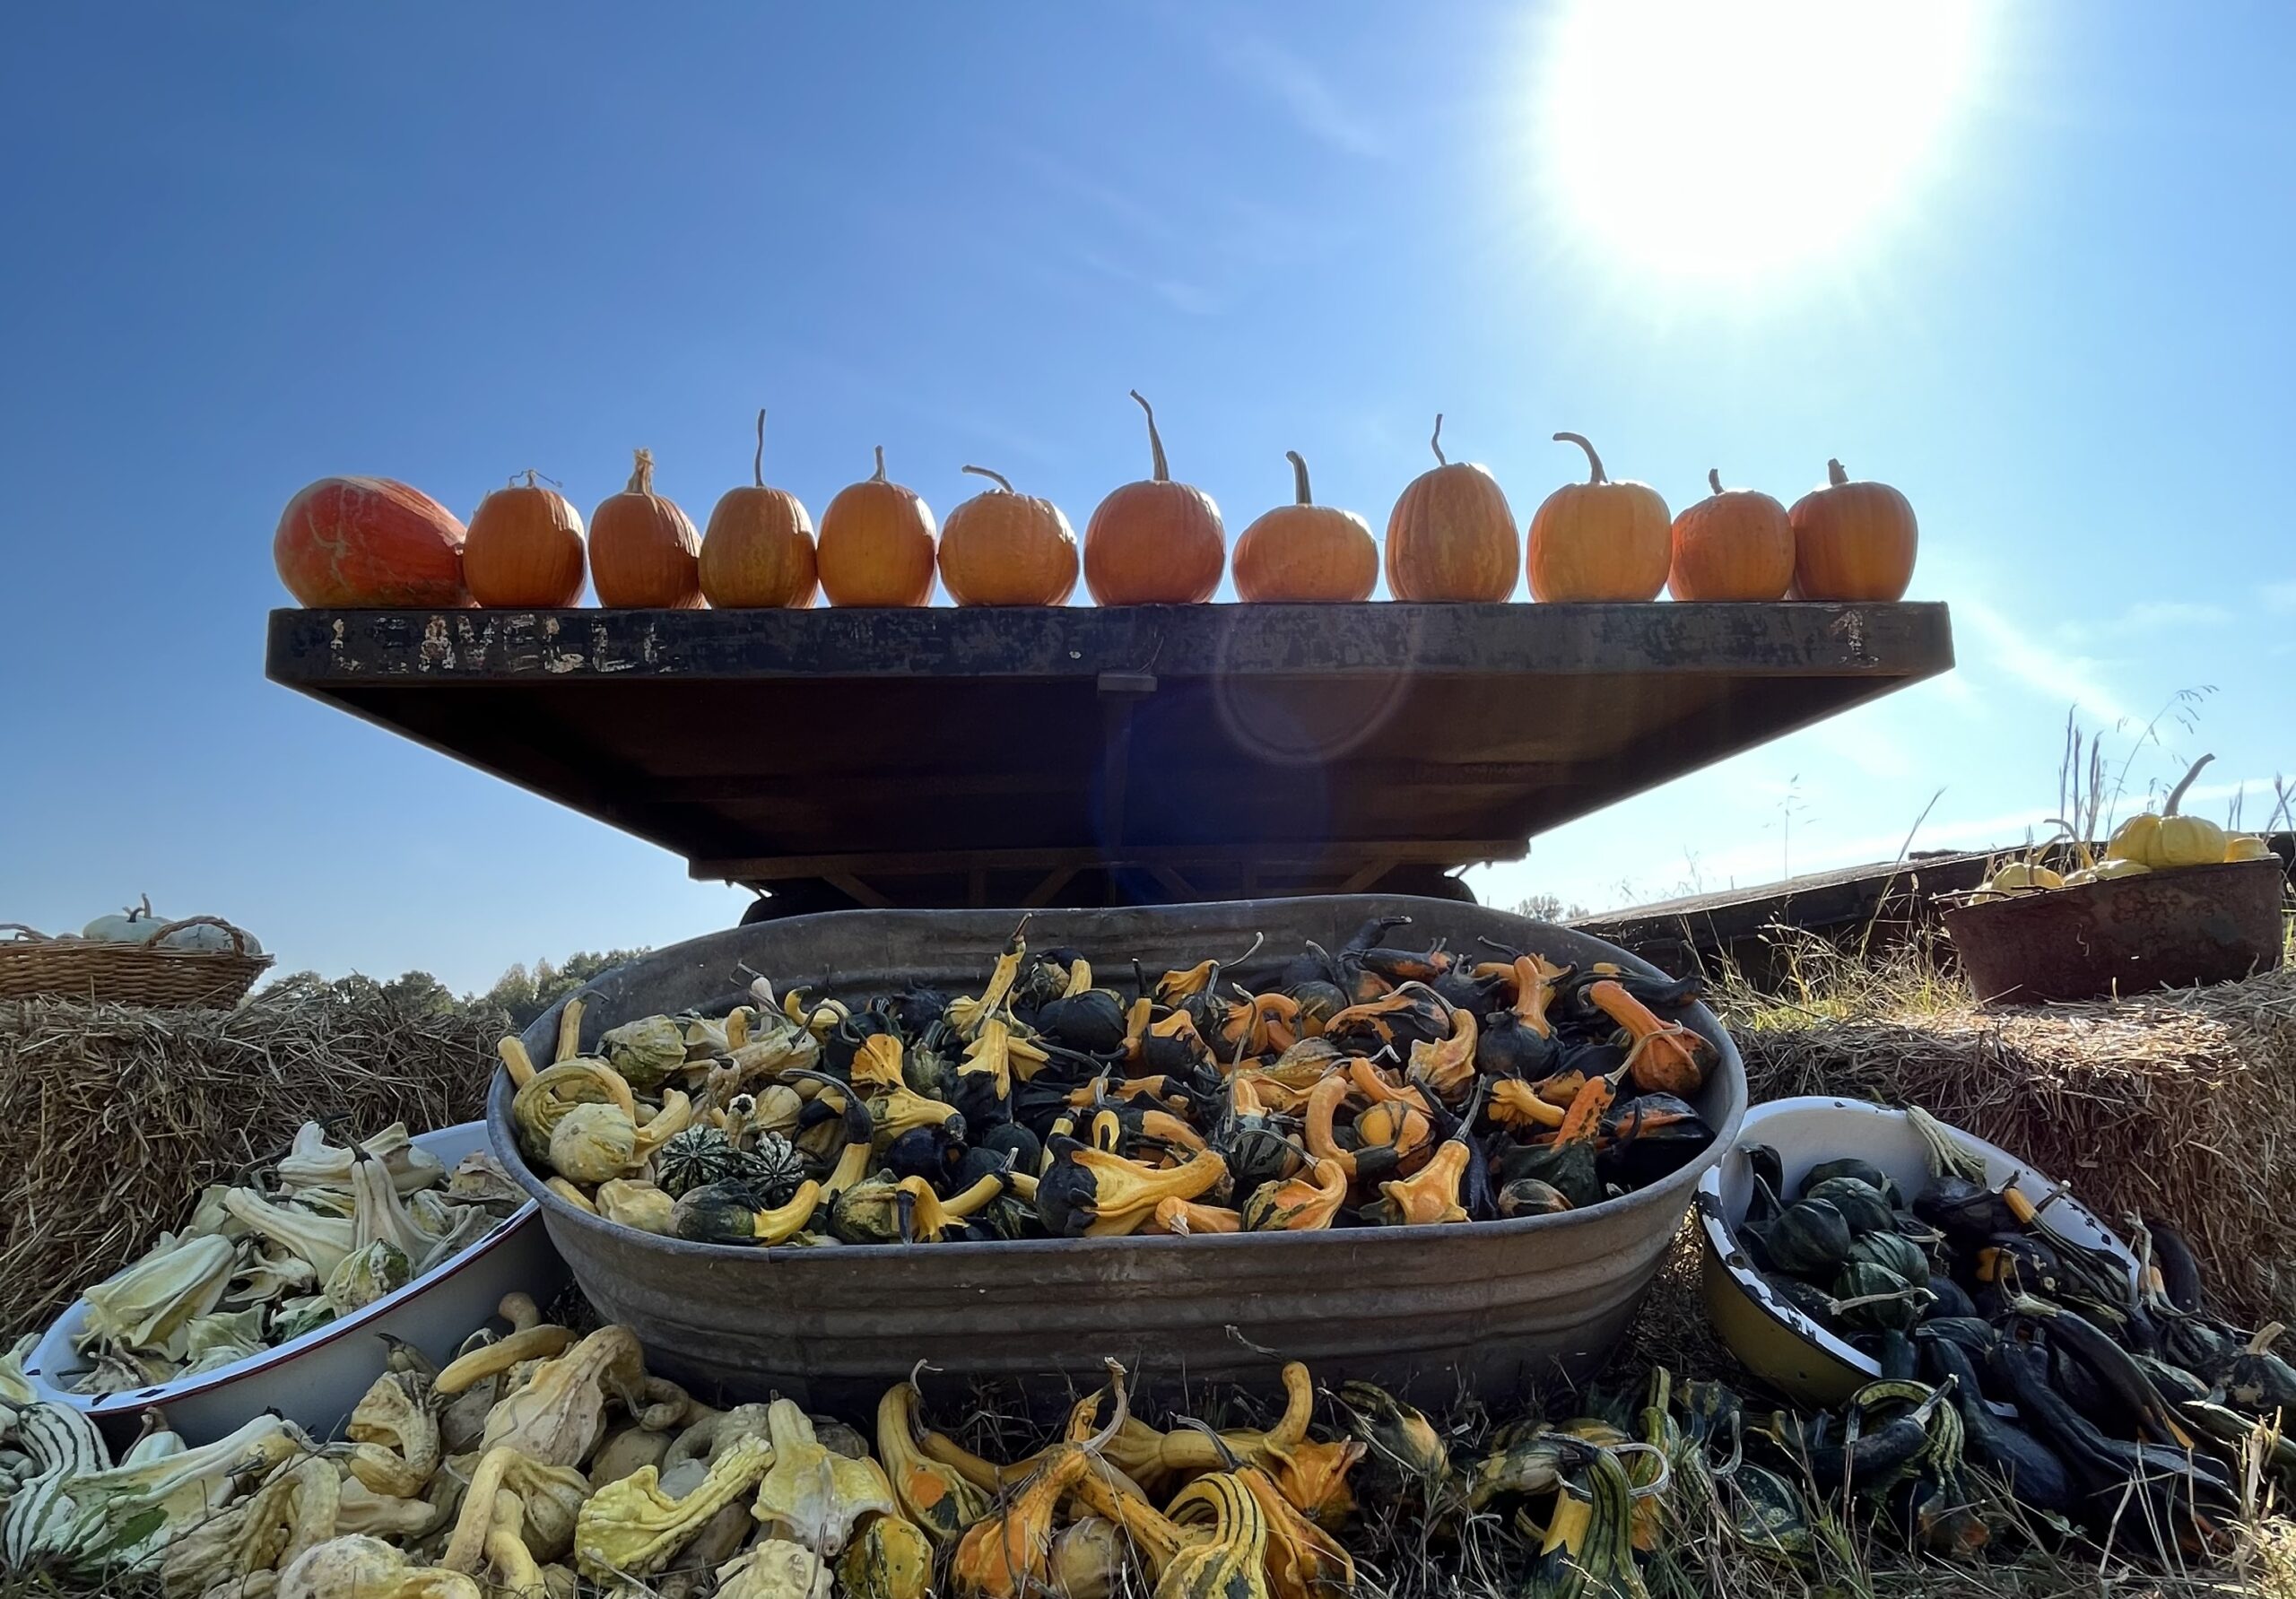 Pumpkins lined up on a trailer with gourds displayed below